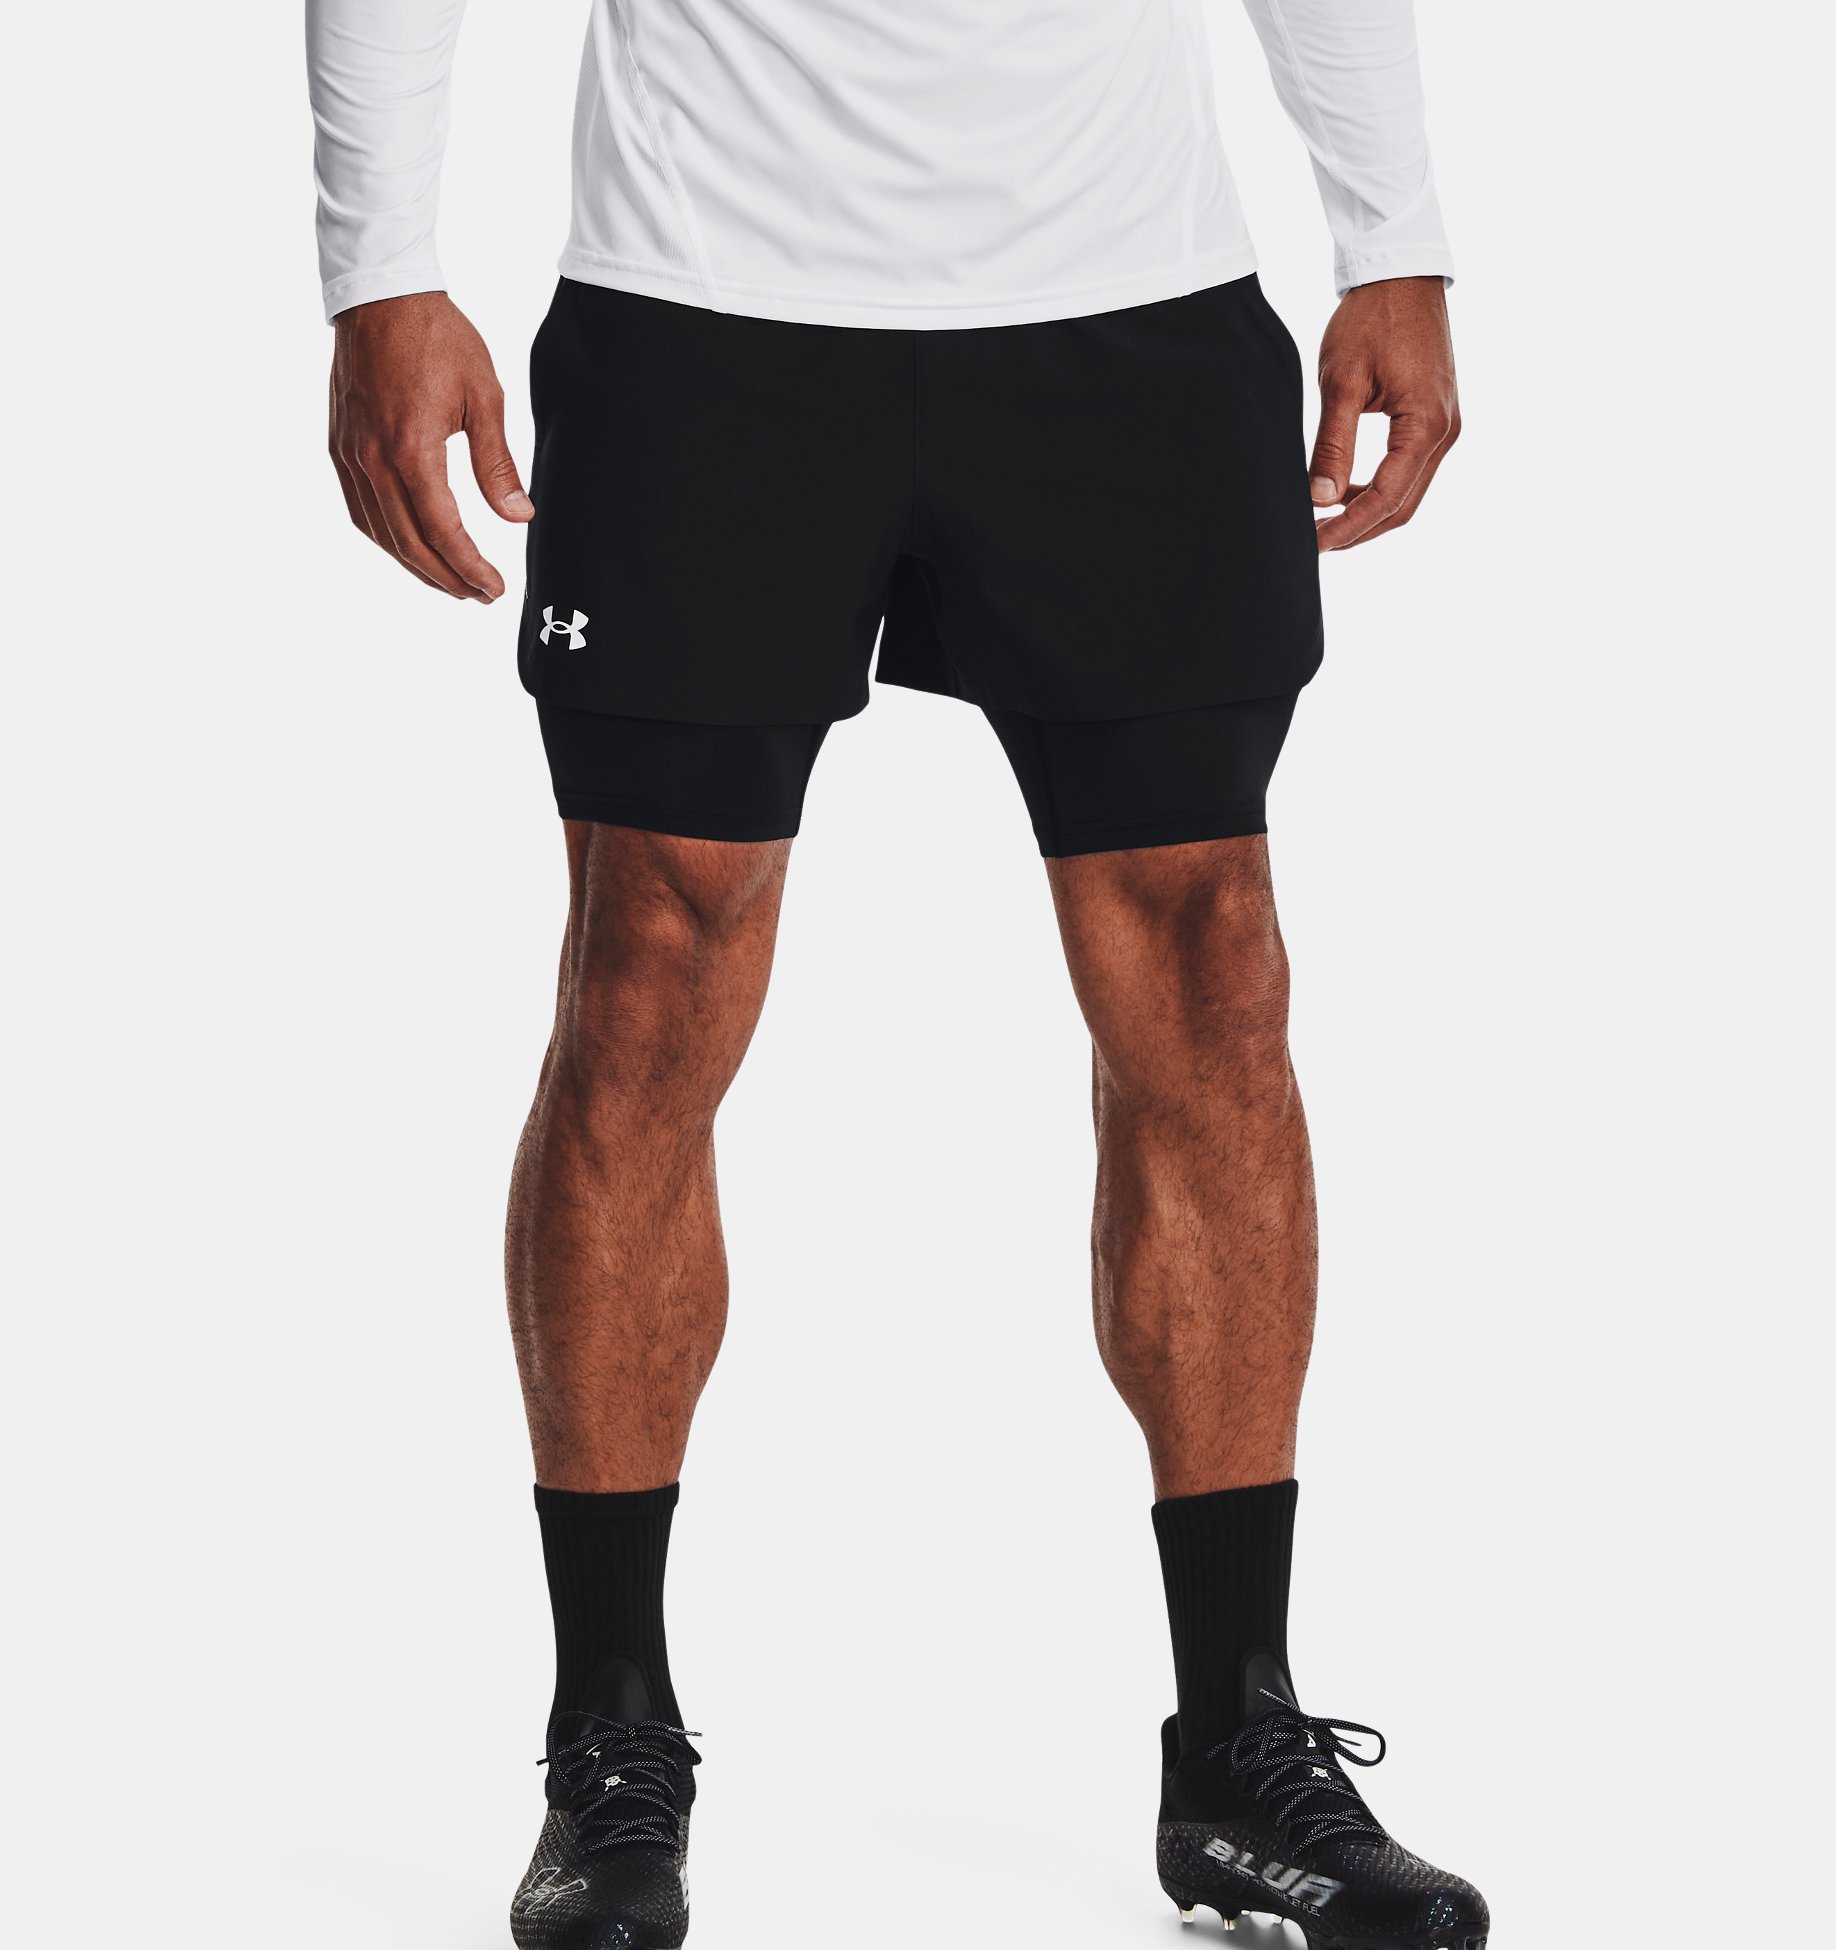 Under Armour UA Mens Training Shorts Fitted Gym Short Football Shorts